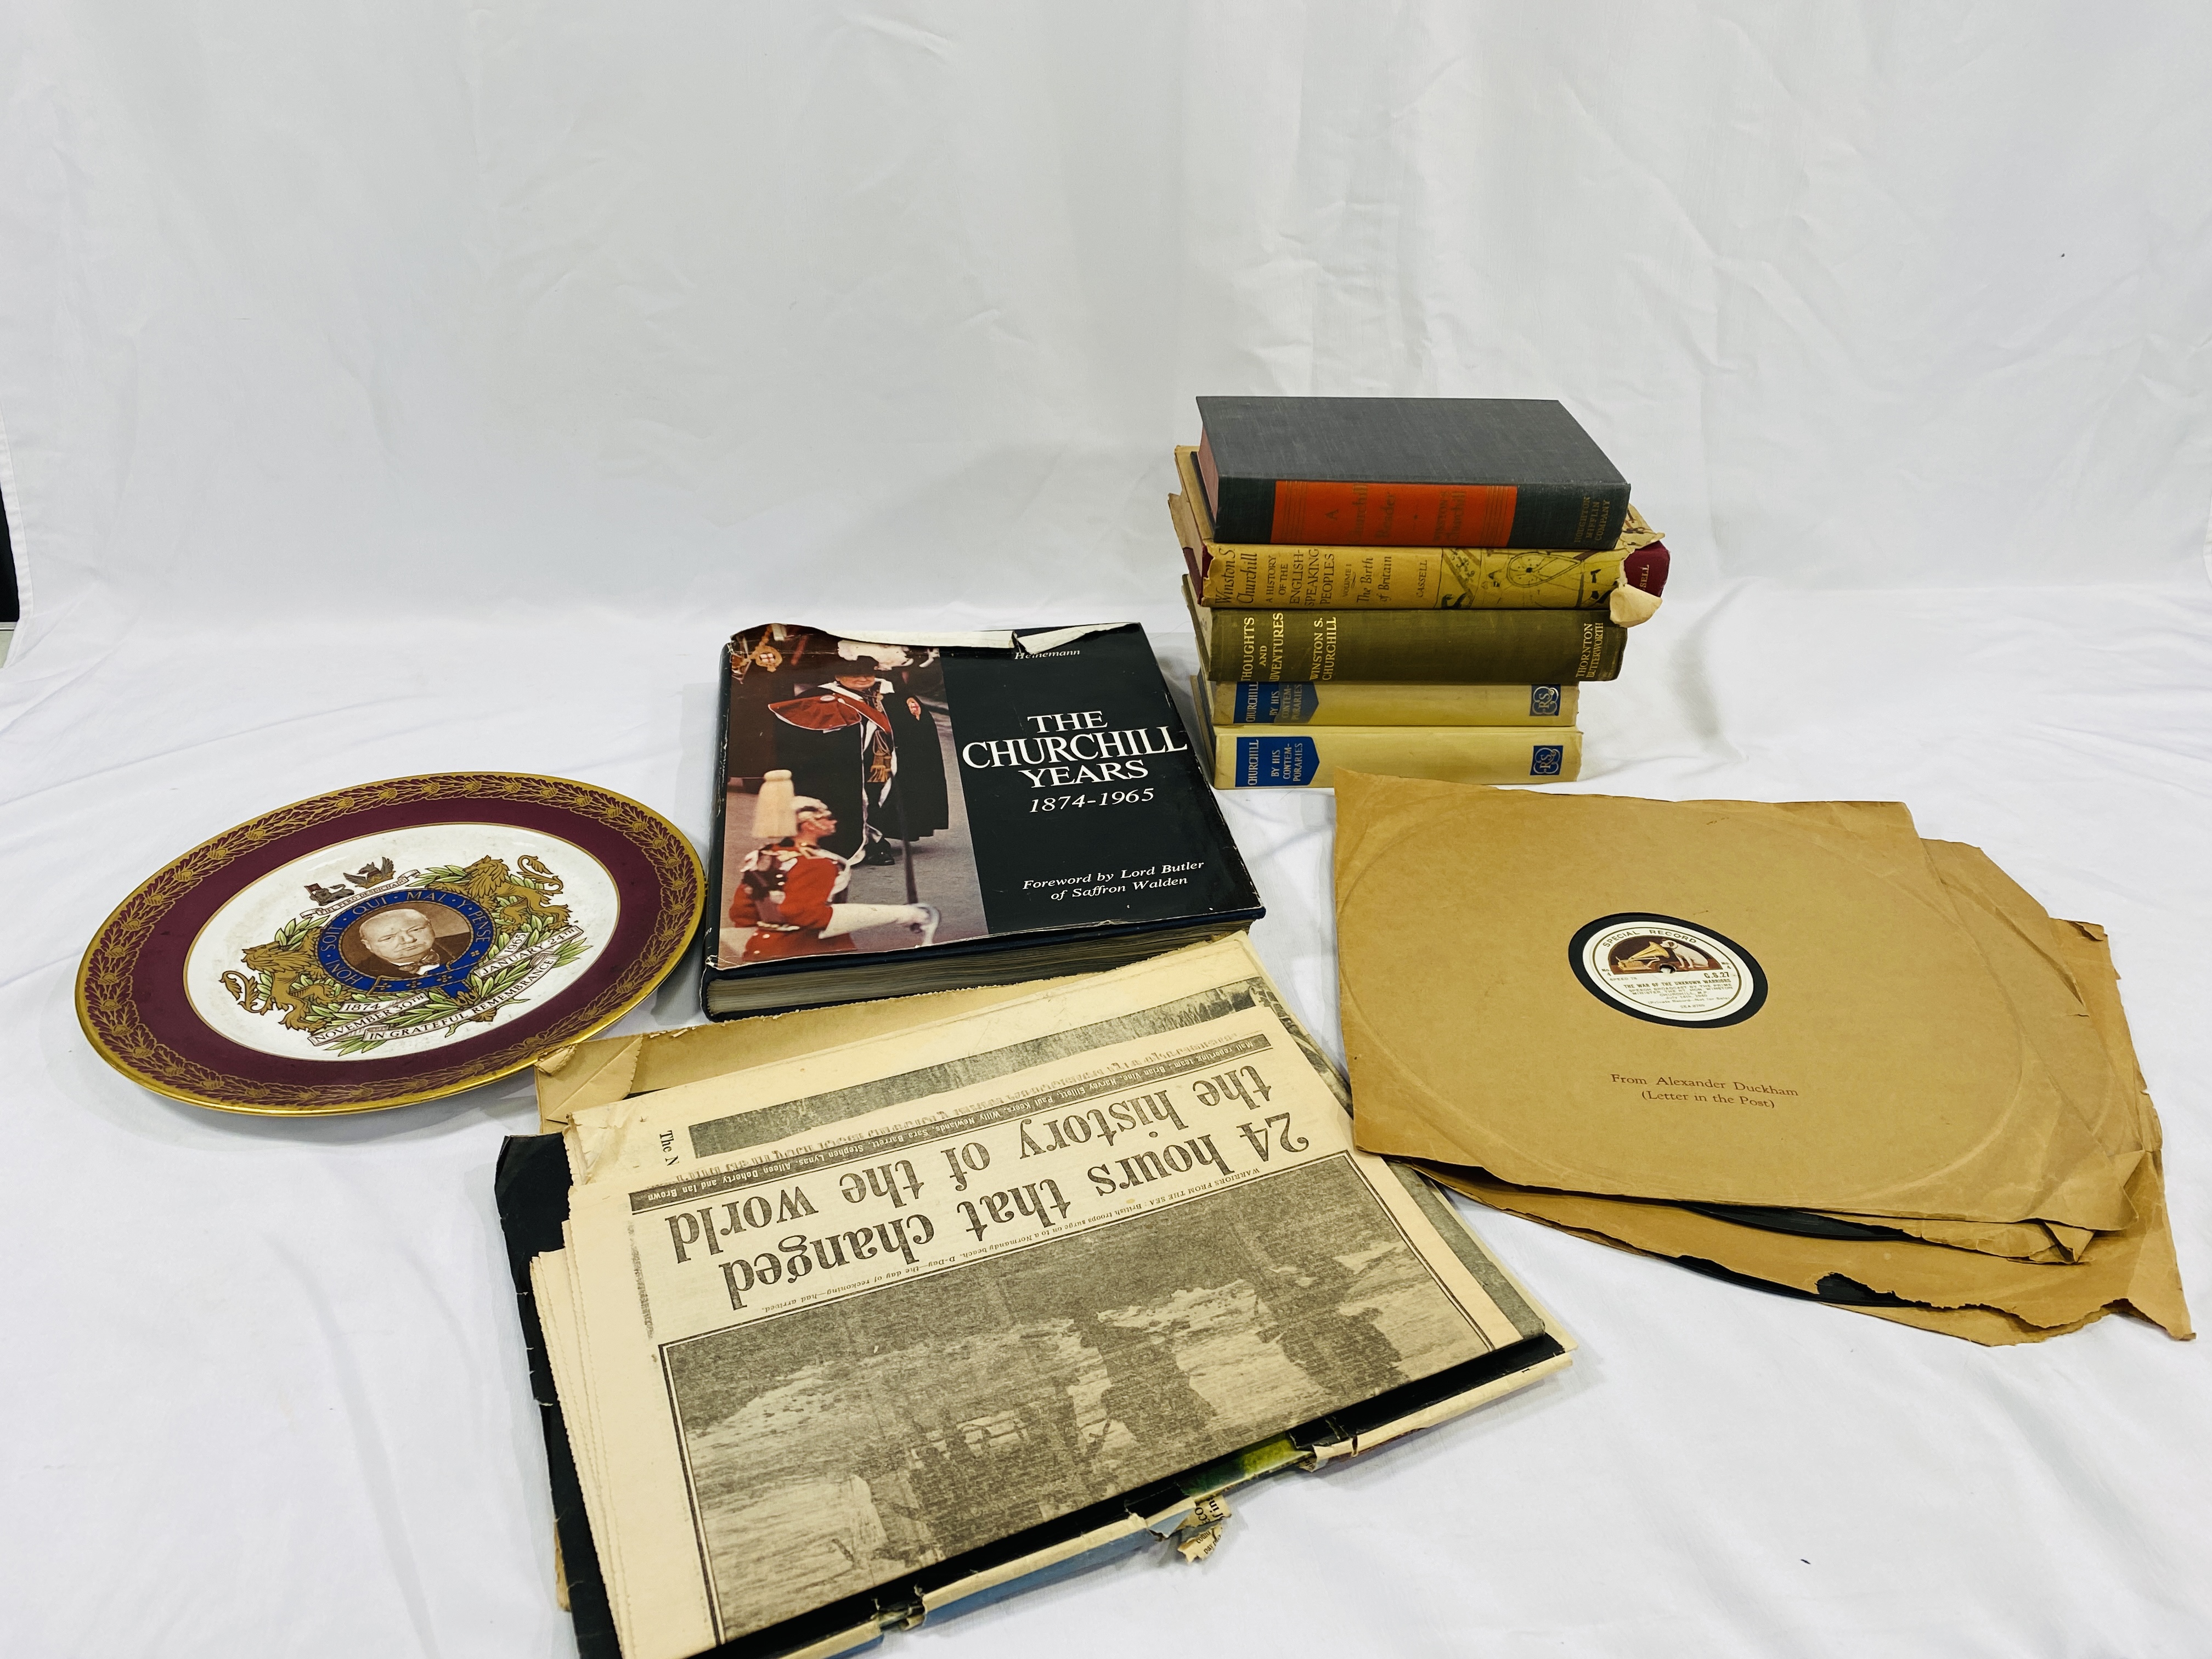 Collection of Churchill publications and recordings of speeches